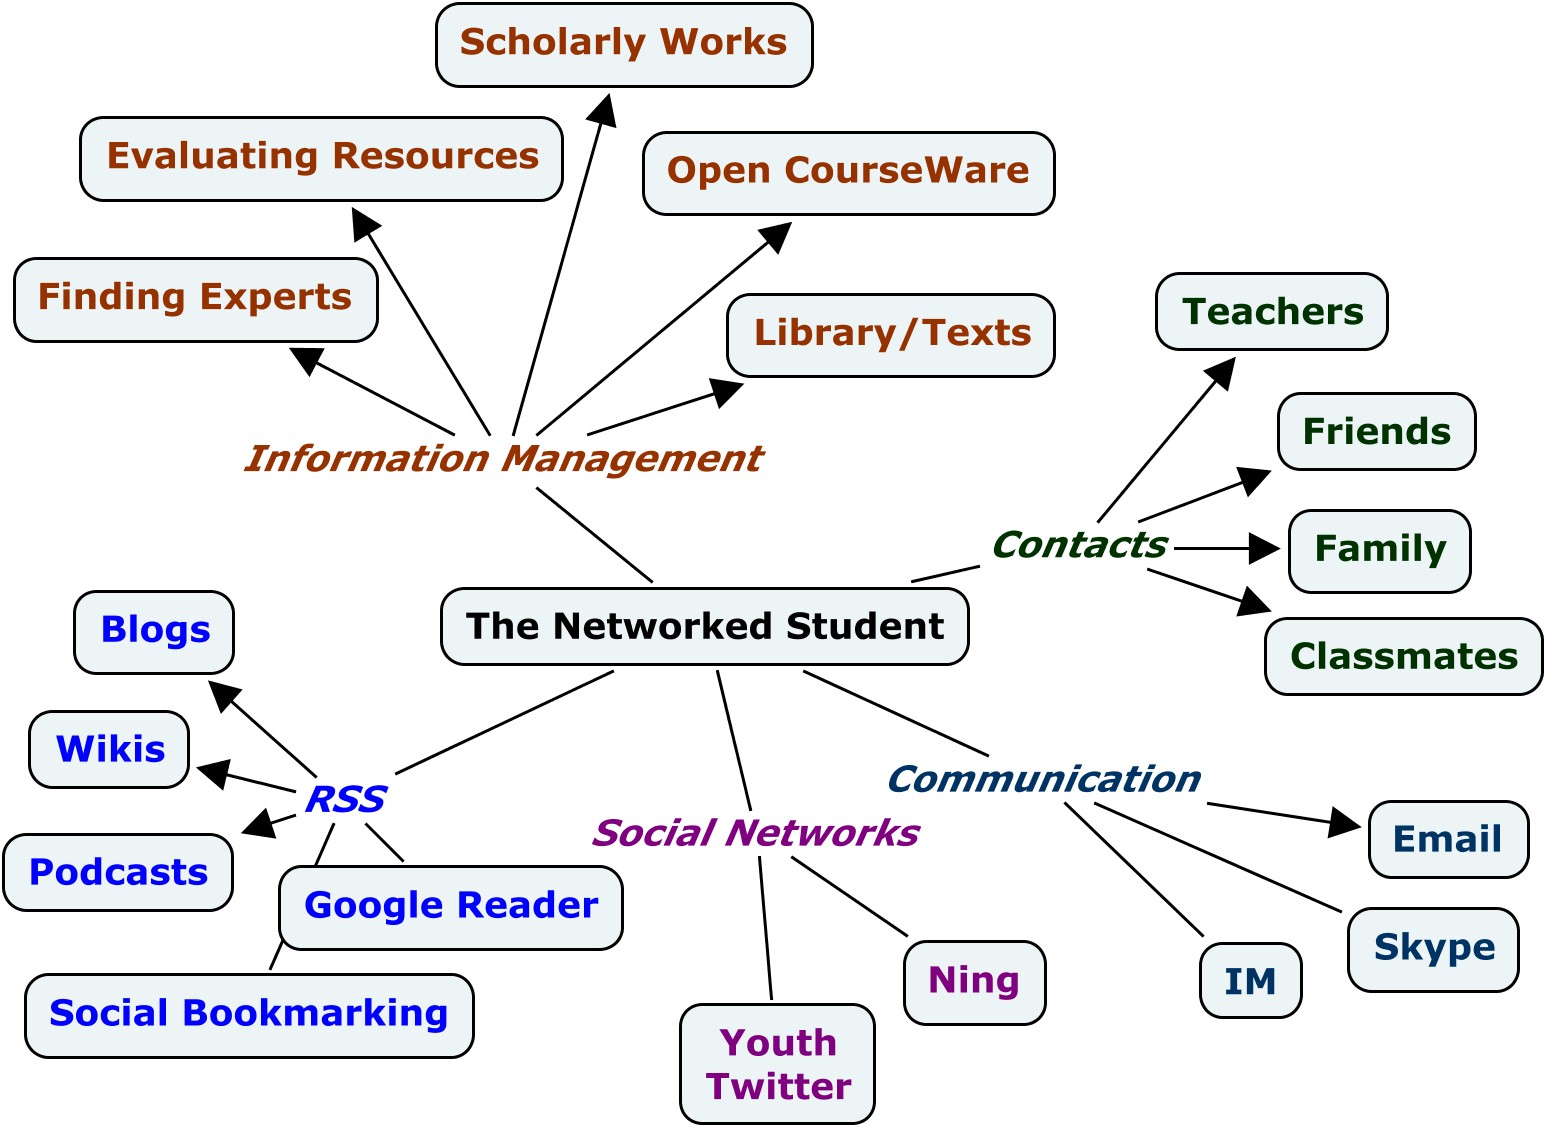 [Networked+Student.jpg]